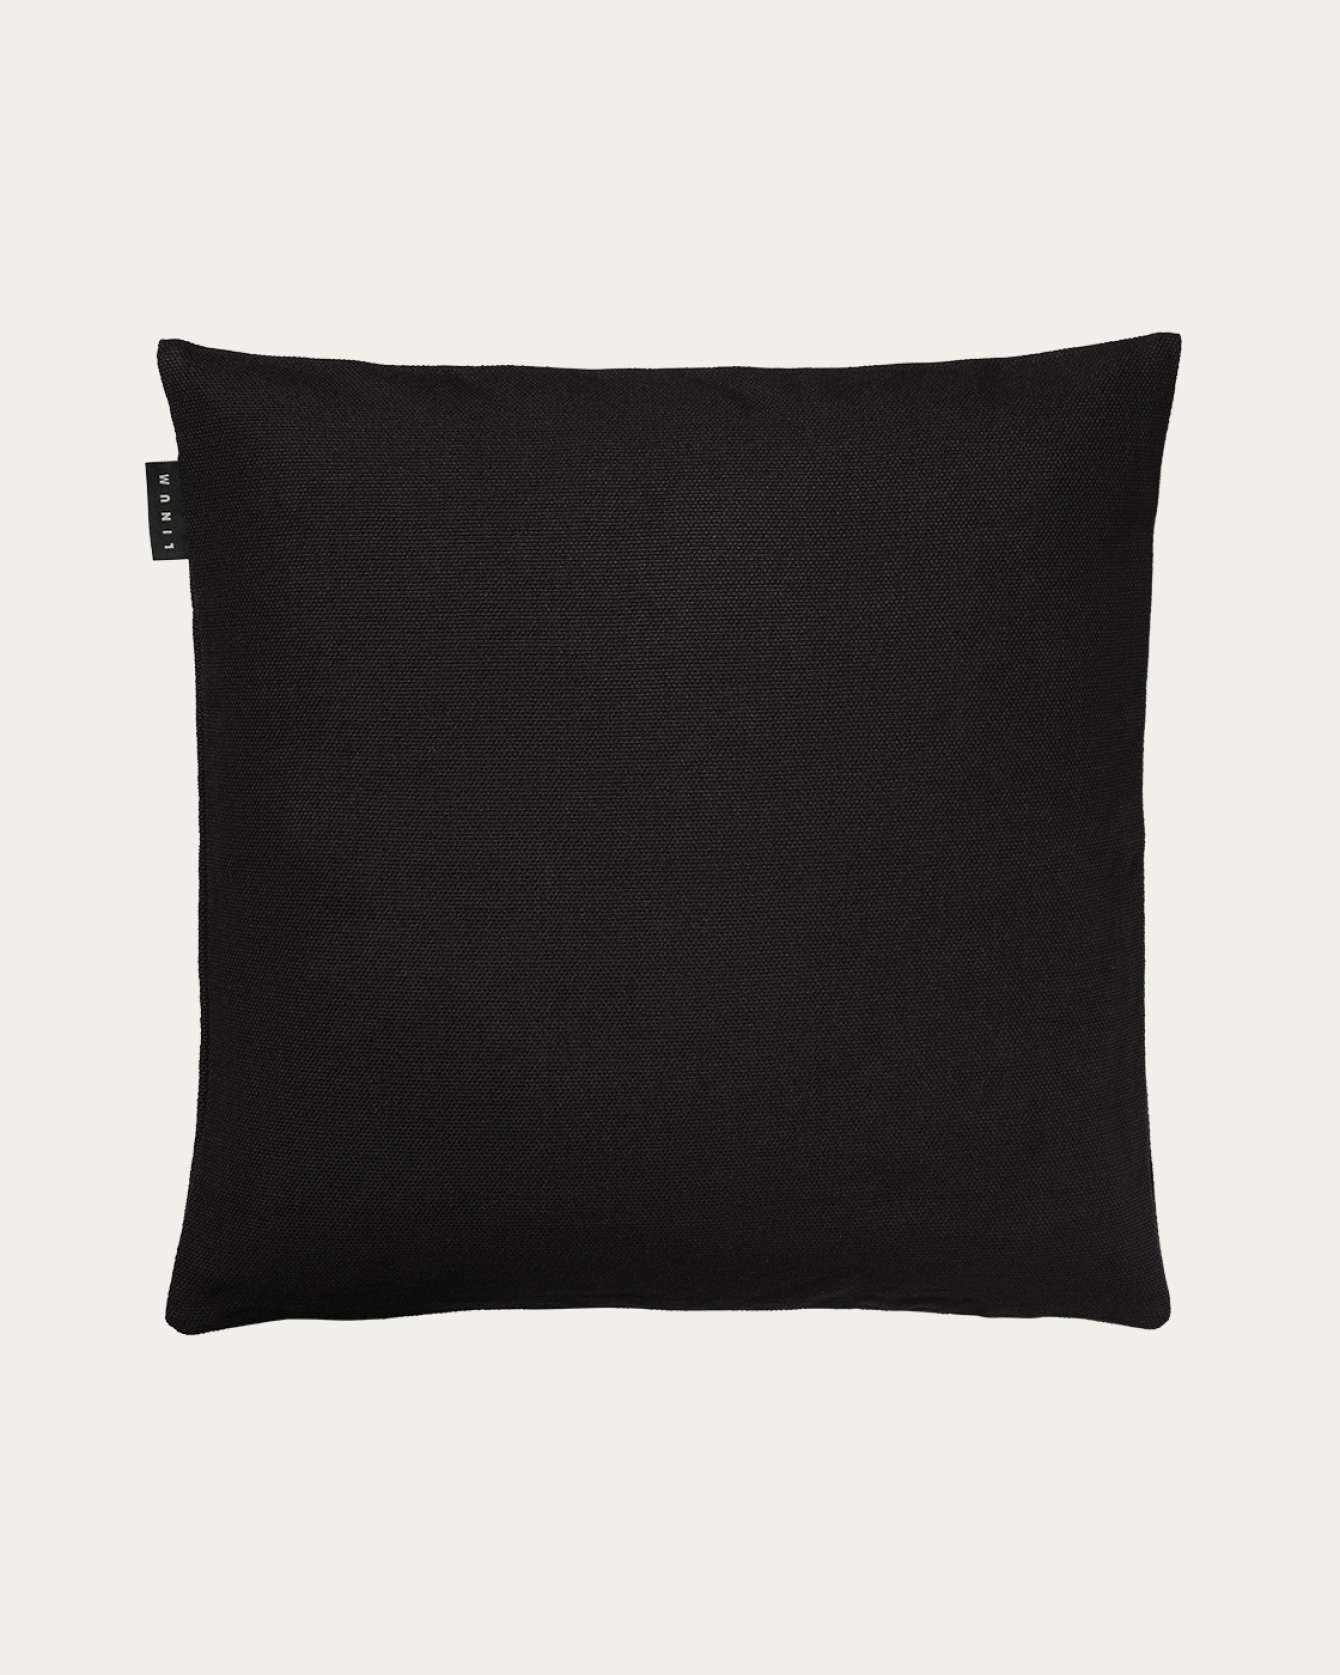 Product image black PEPPER cushion cover made of soft cotton from LINUM DESIGN. Easy to wash and durable for generations. Size 50x50 cm.